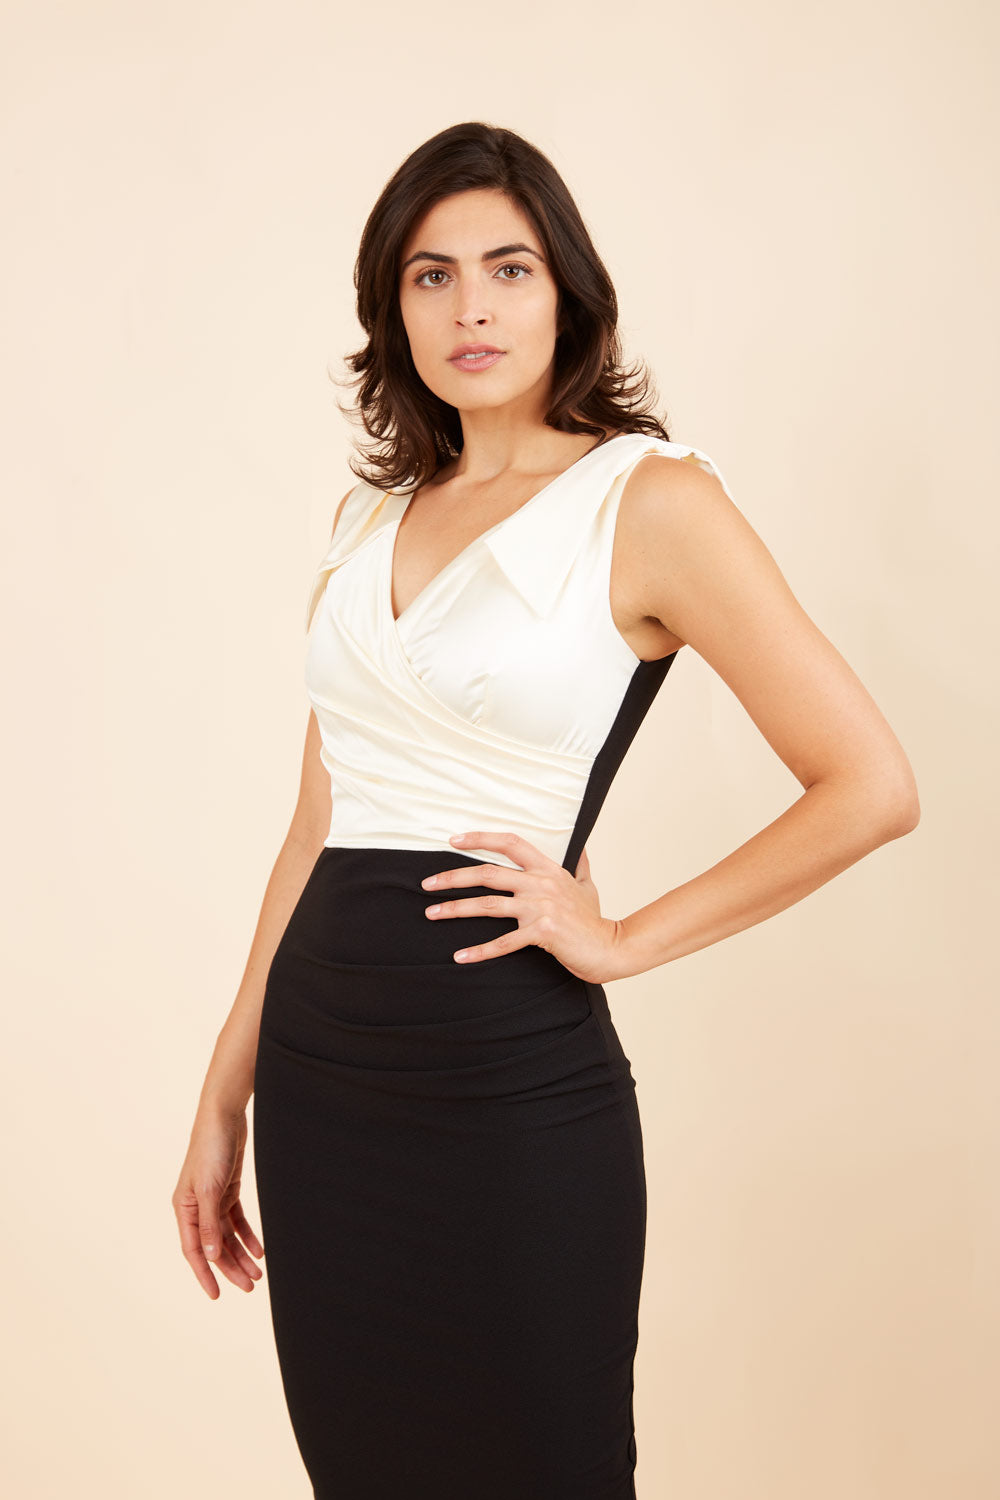 Model wearing the Diva Broadway Satin dress with satin bodice to front and pleating at the front in cream and black back image